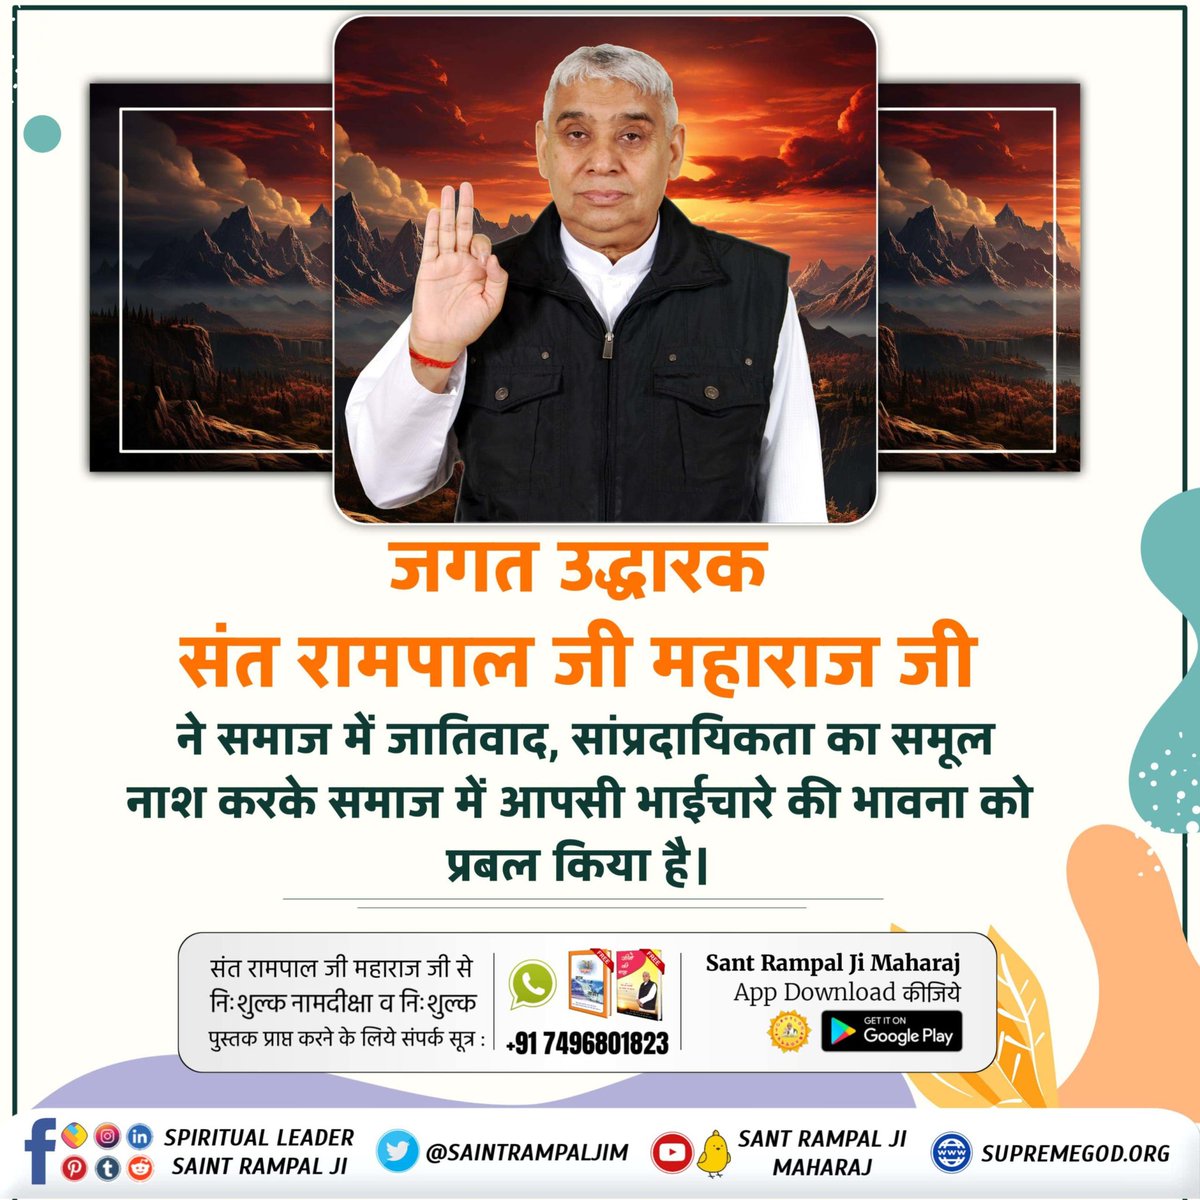 #जगत_उद्धारक_संत_रामपालजी
Currently, Saint Rampal Ji Maharaj is making a significant contribution towards eradicating caste & religious discrimination at its roots. People from all castes, religions, and beliefs are taking initiation from him.
Saviour Of The World